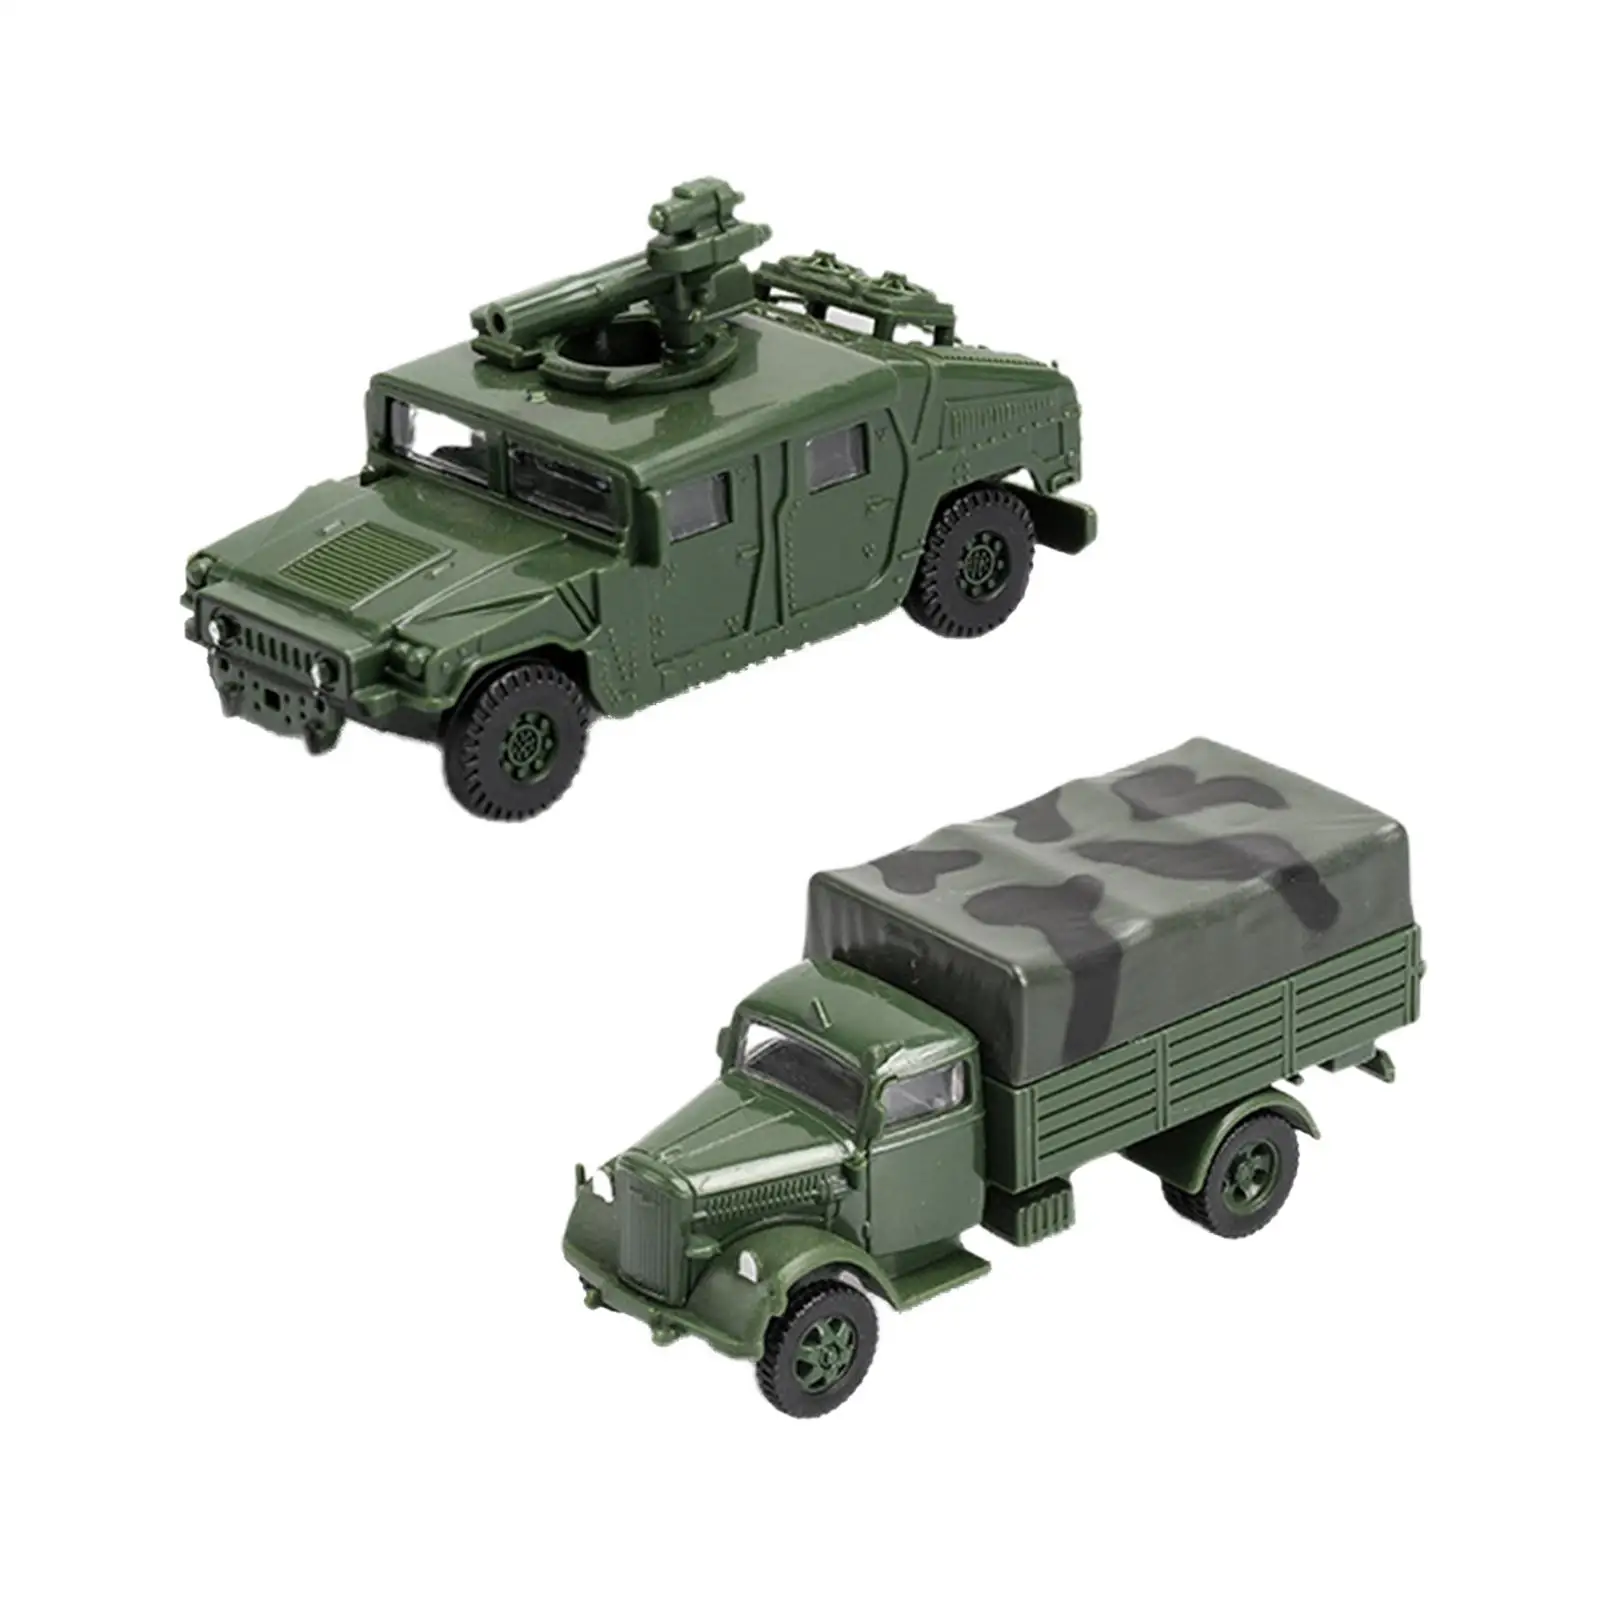 2x 4D 1:72 Assemble American Humvee Kits Army Vehicle for Christmas Present